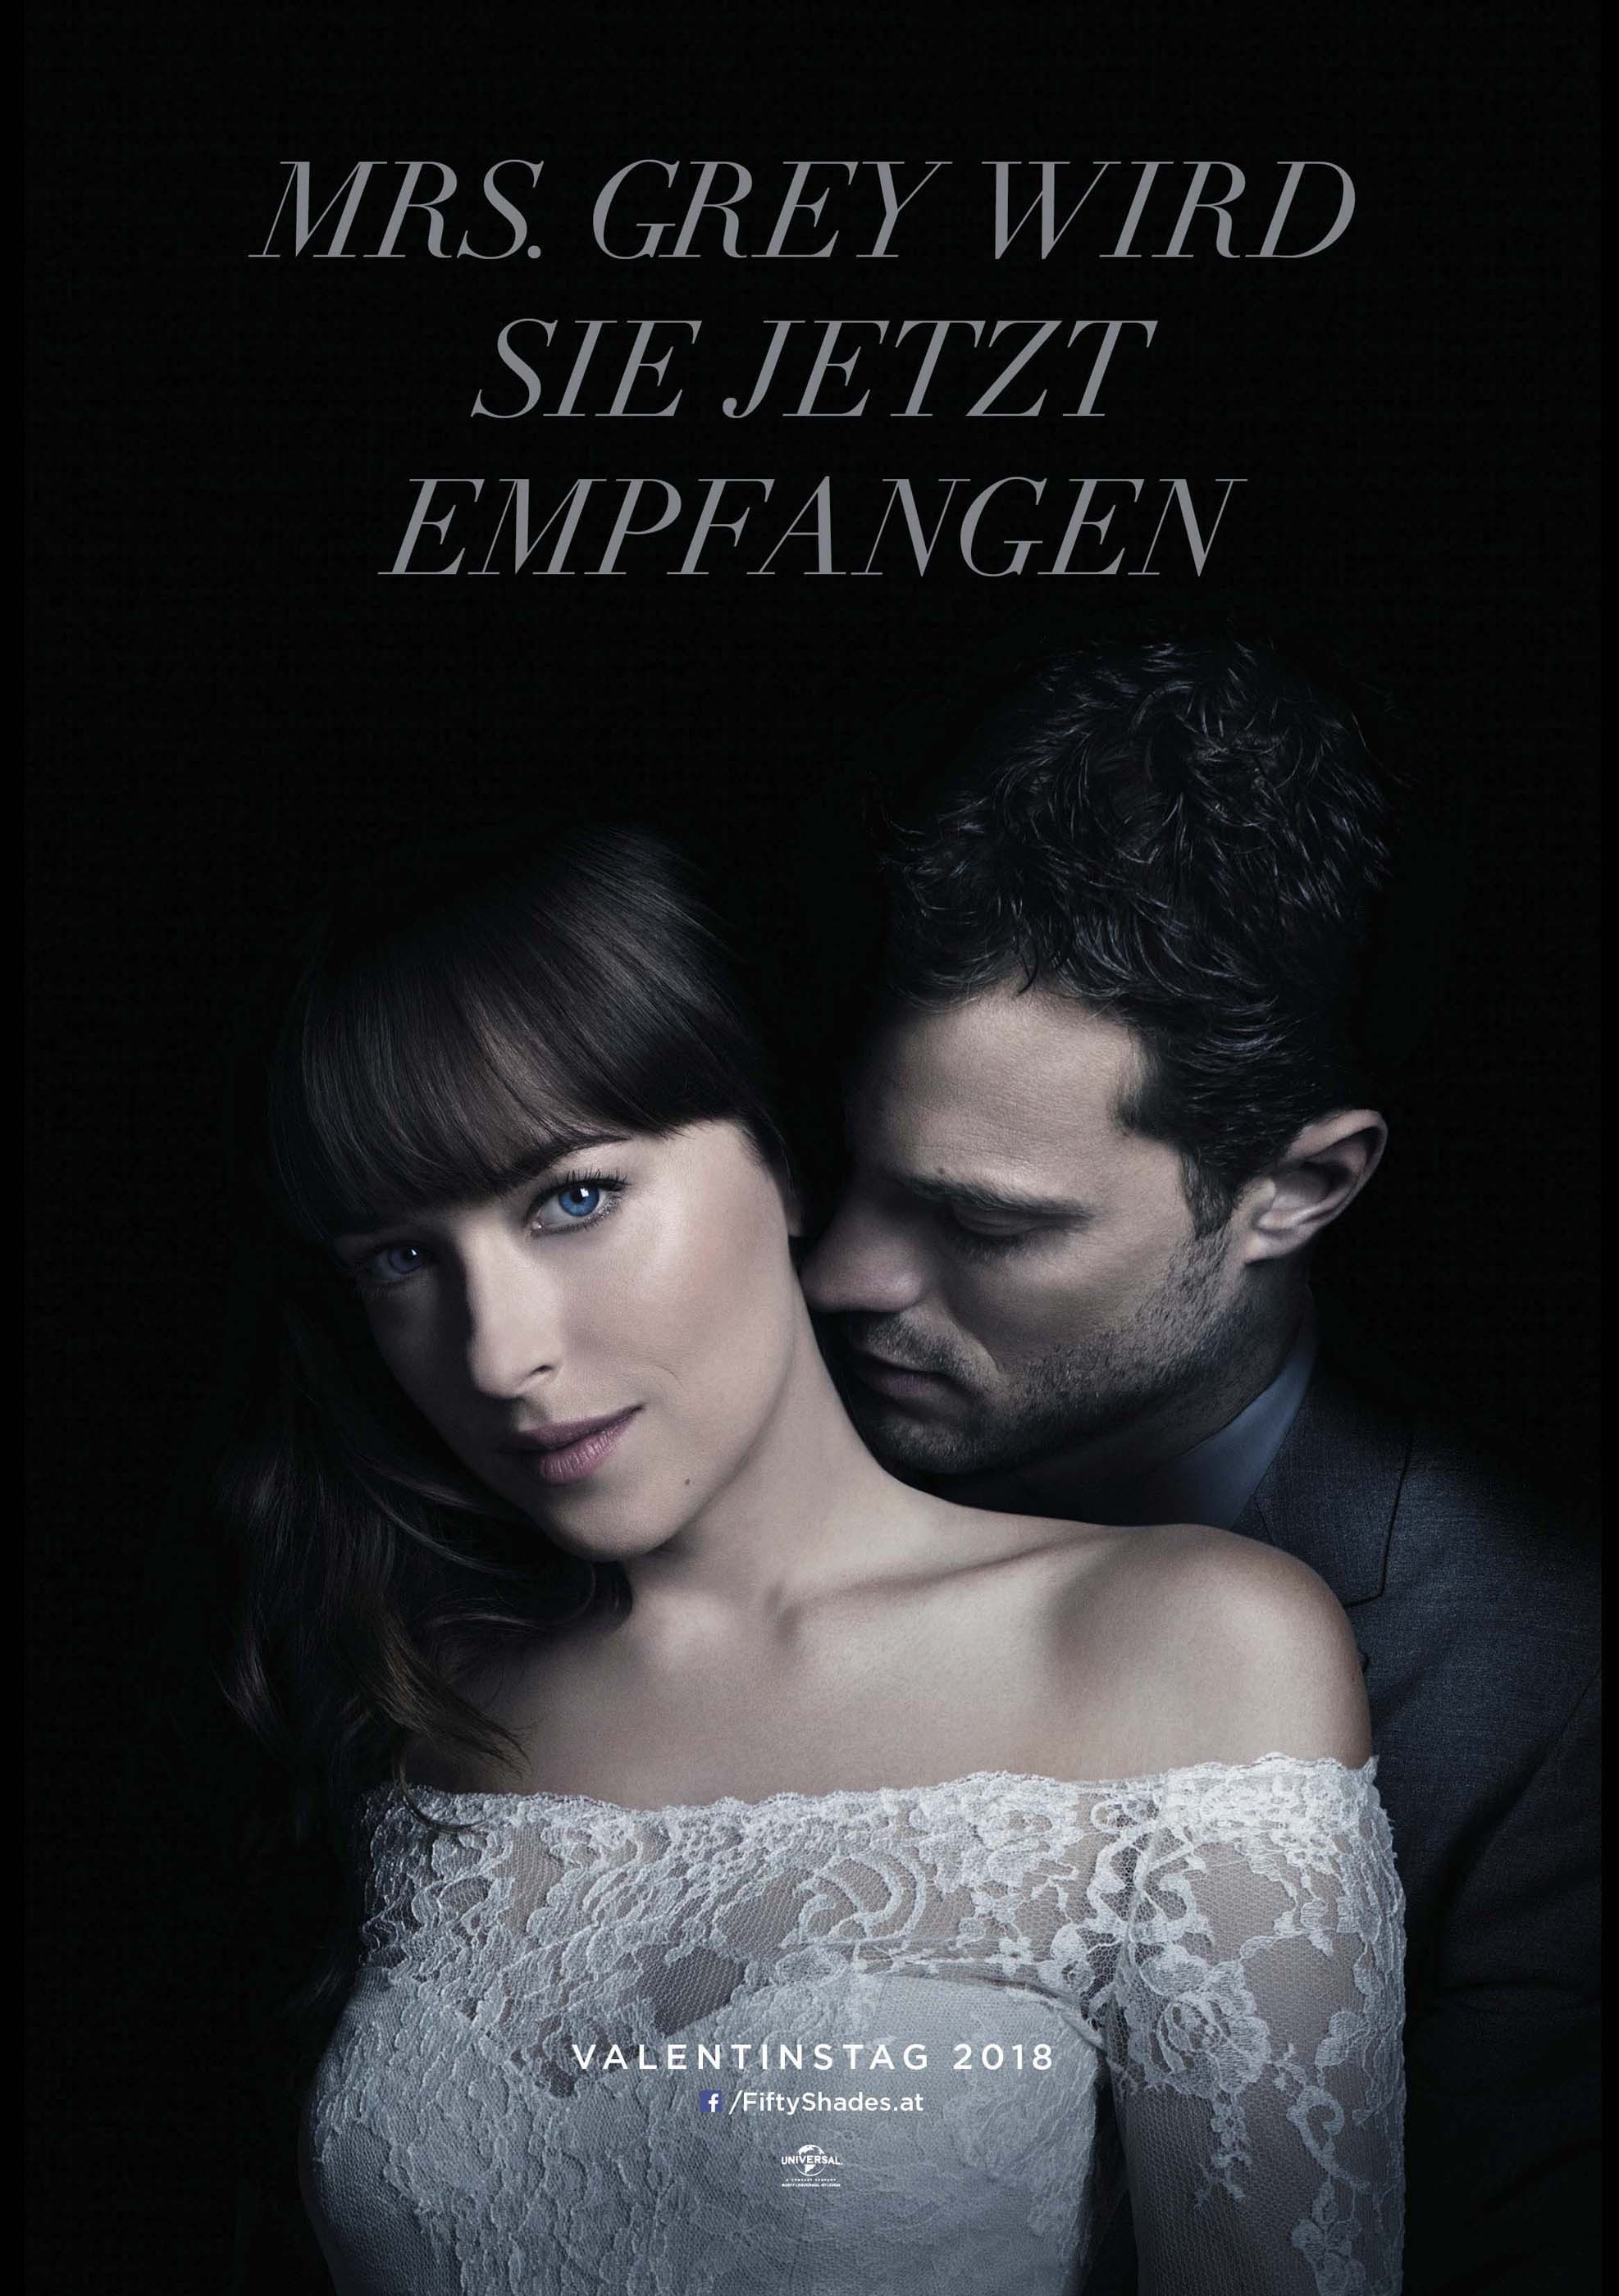 Fifty Shades of Grey - Befreite Lust